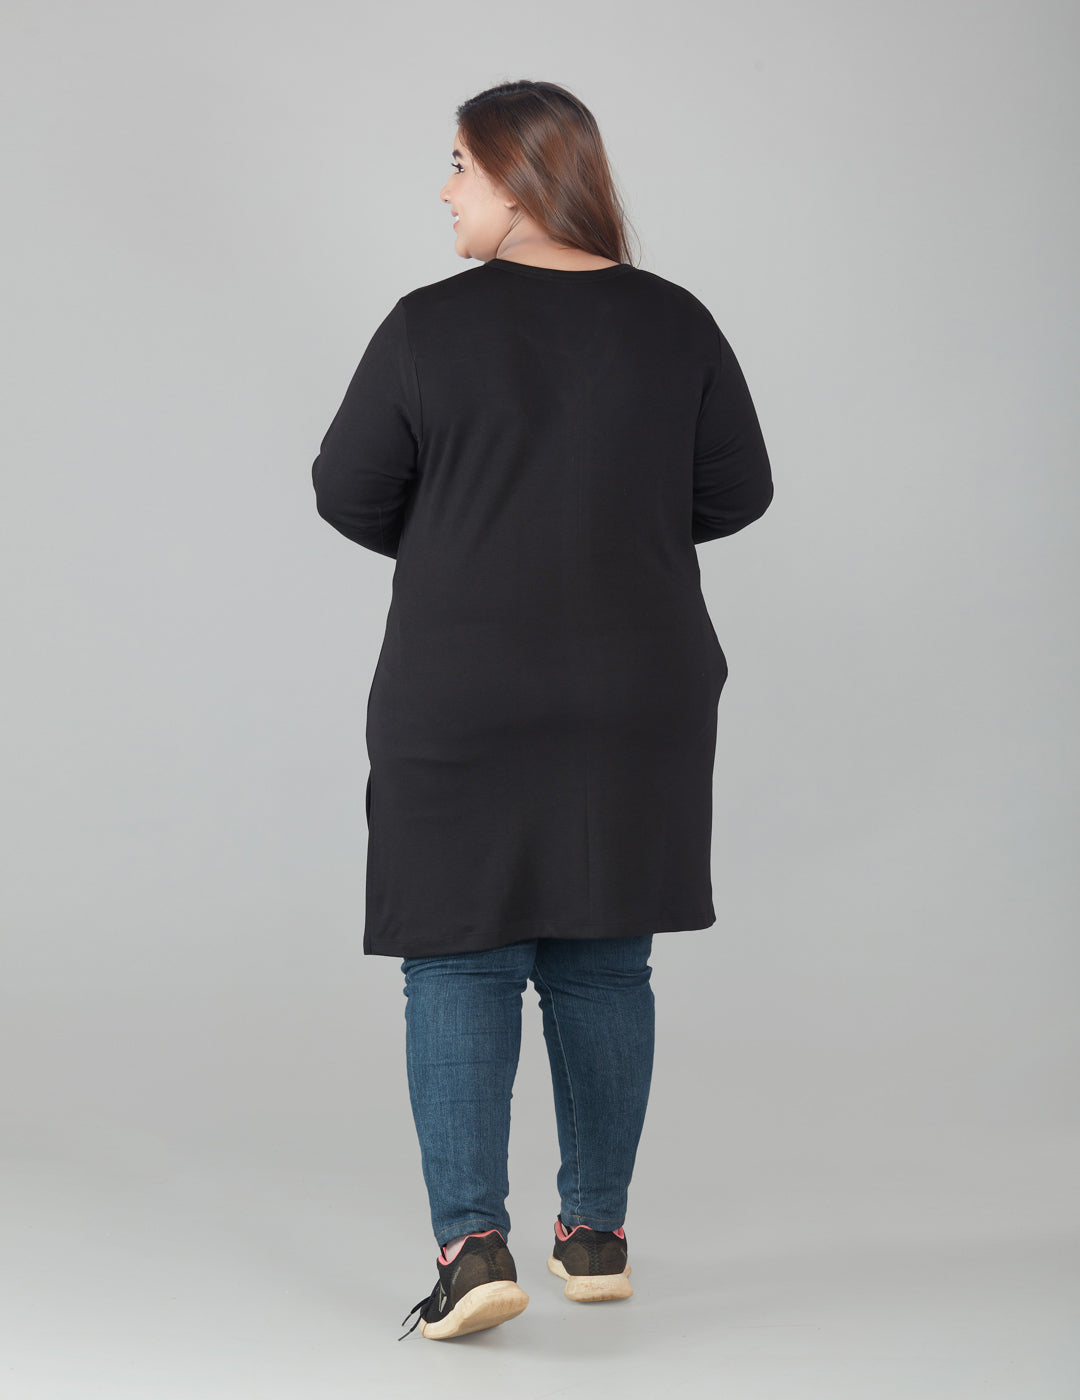 Stylish Plus Size Half Sleeve Long T-shirts For Women (Pack of 2) Online In India